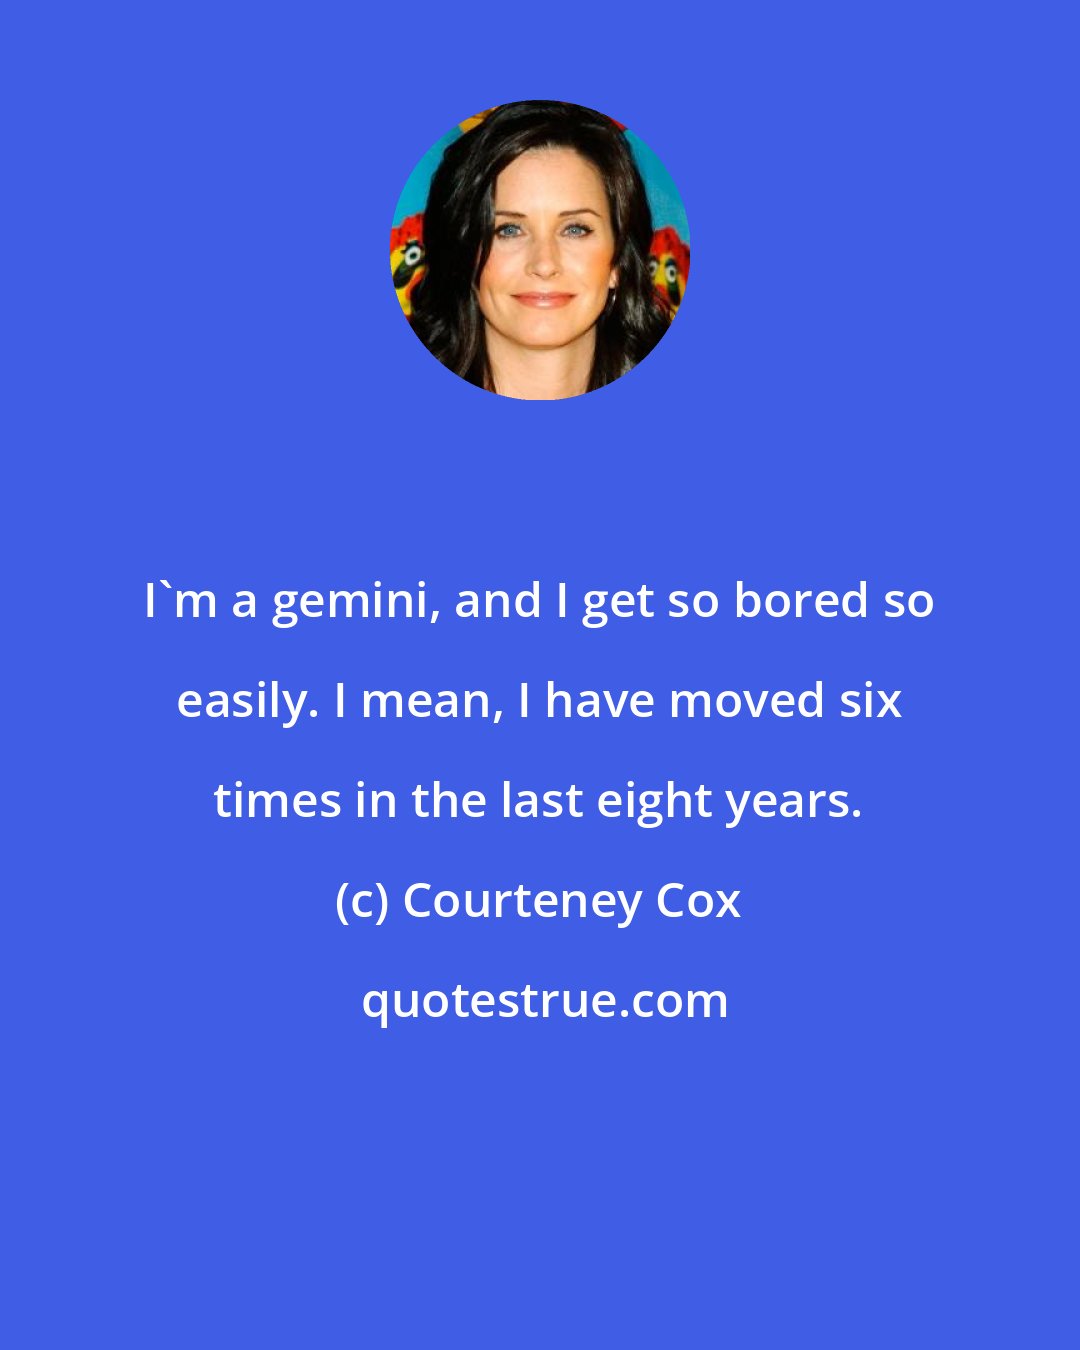 Courteney Cox: I'm a gemini, and I get so bored so easily. I mean, I have moved six times in the last eight years.